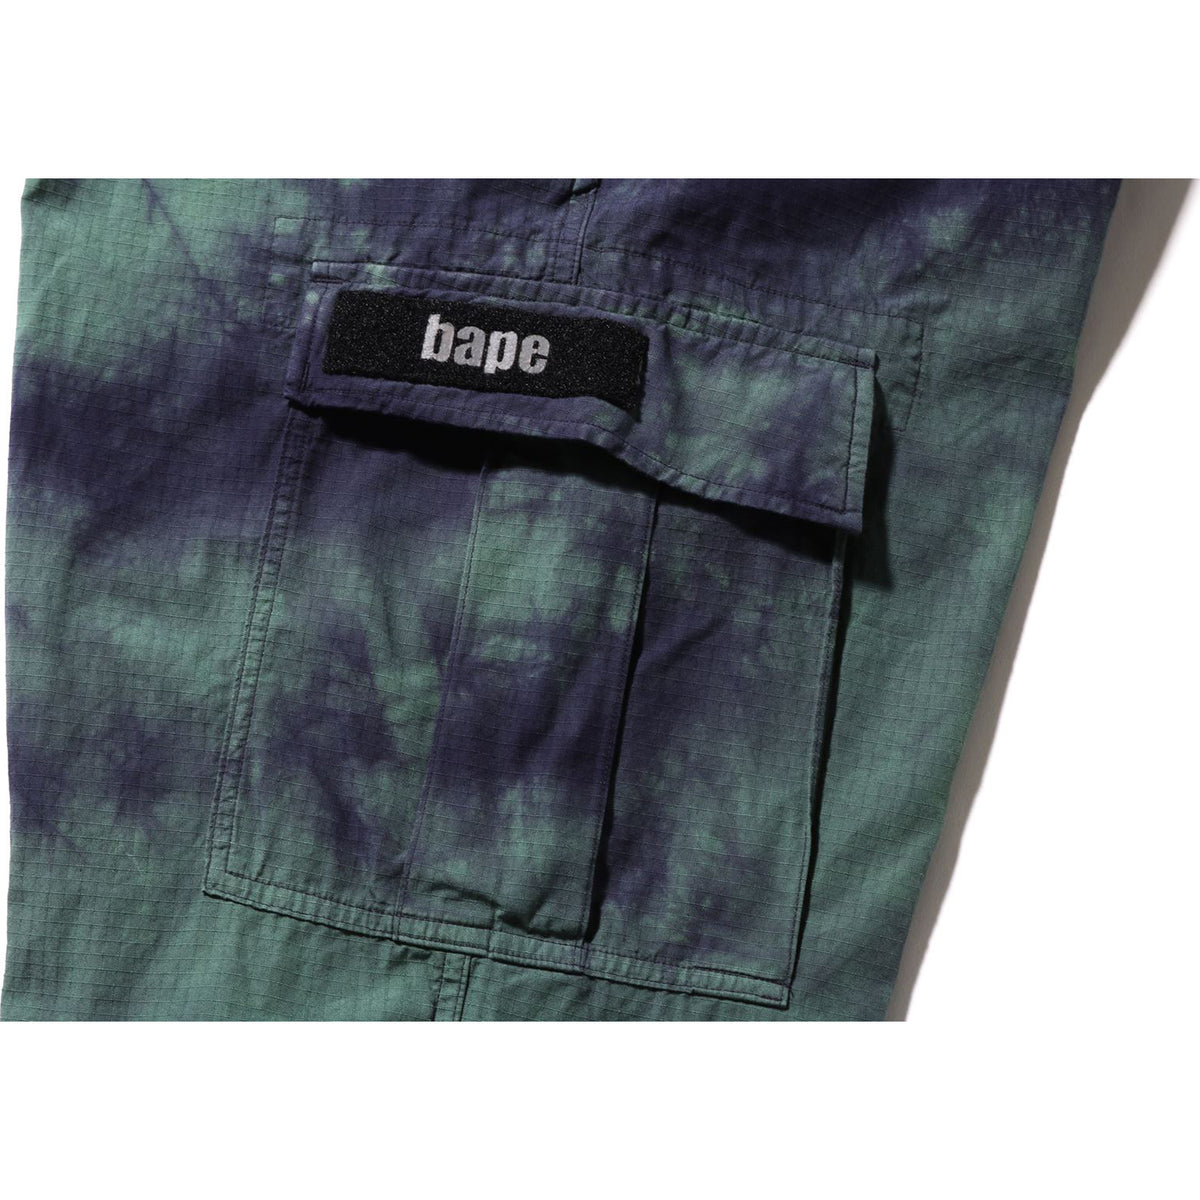 TIE DYE RELAXED FIT 6 POCKET PANTS MENS